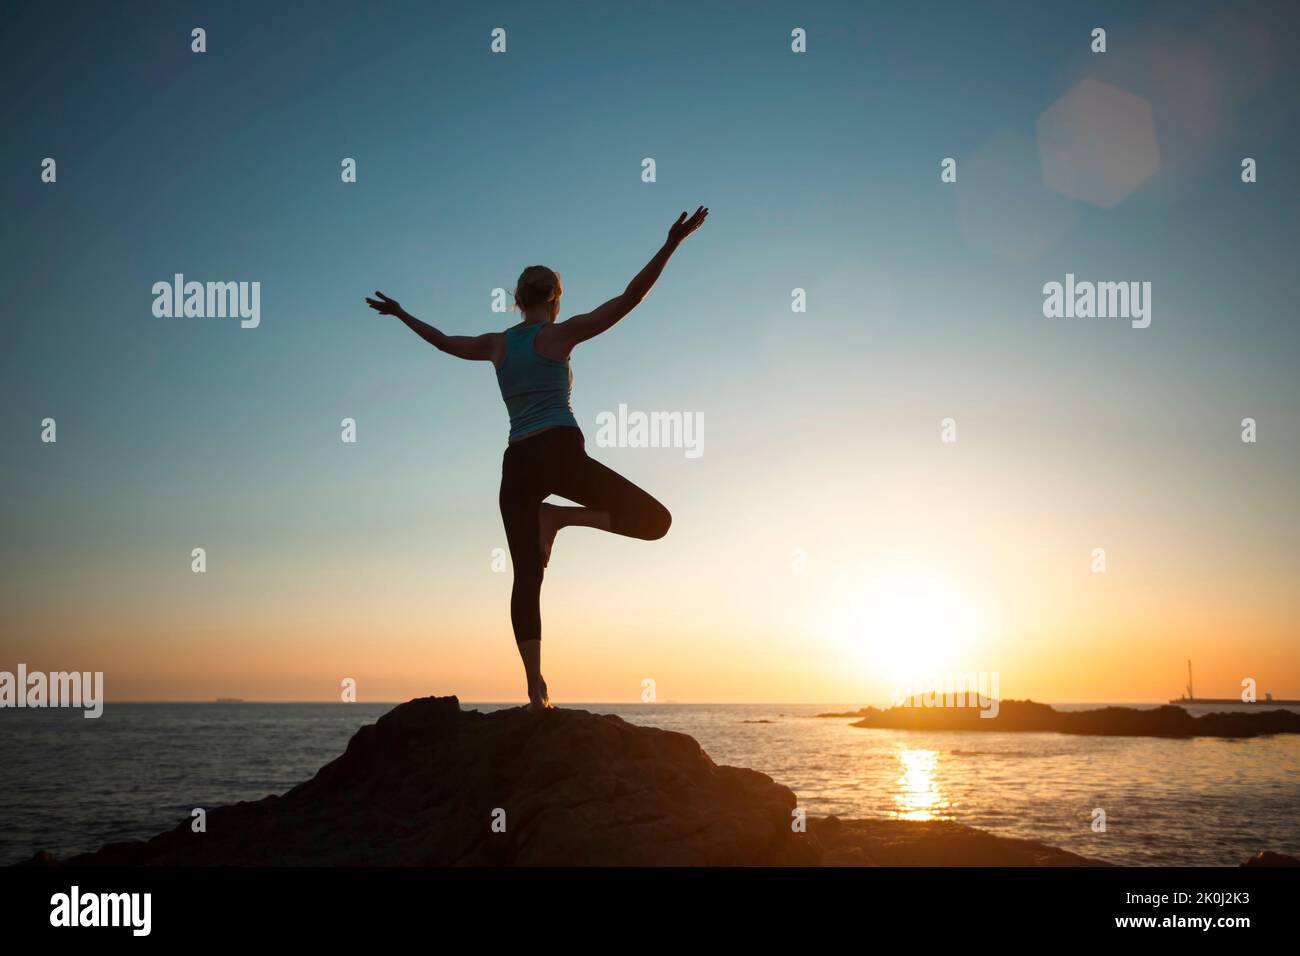 A woman does yoga, meditating near the ocean. A silhouette in the sunset. Stock Photo